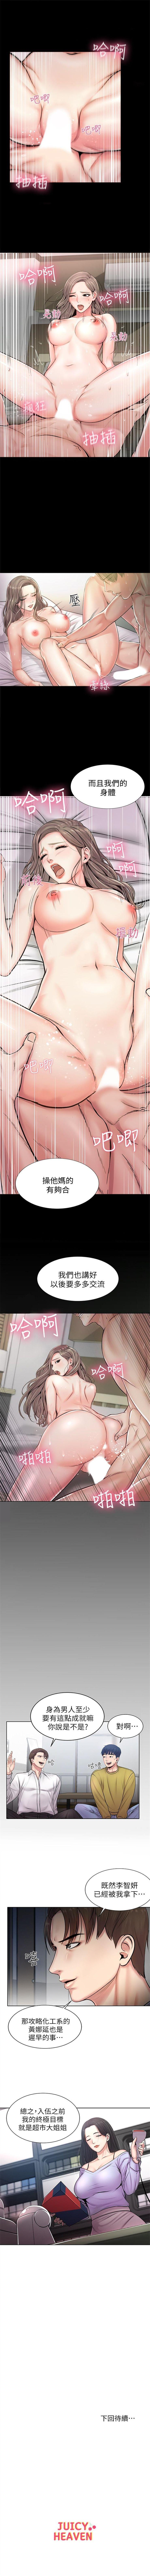 Webcamchat 超市的漂亮姐姐 1-32 官方中文（連載中） Fat - Page 9